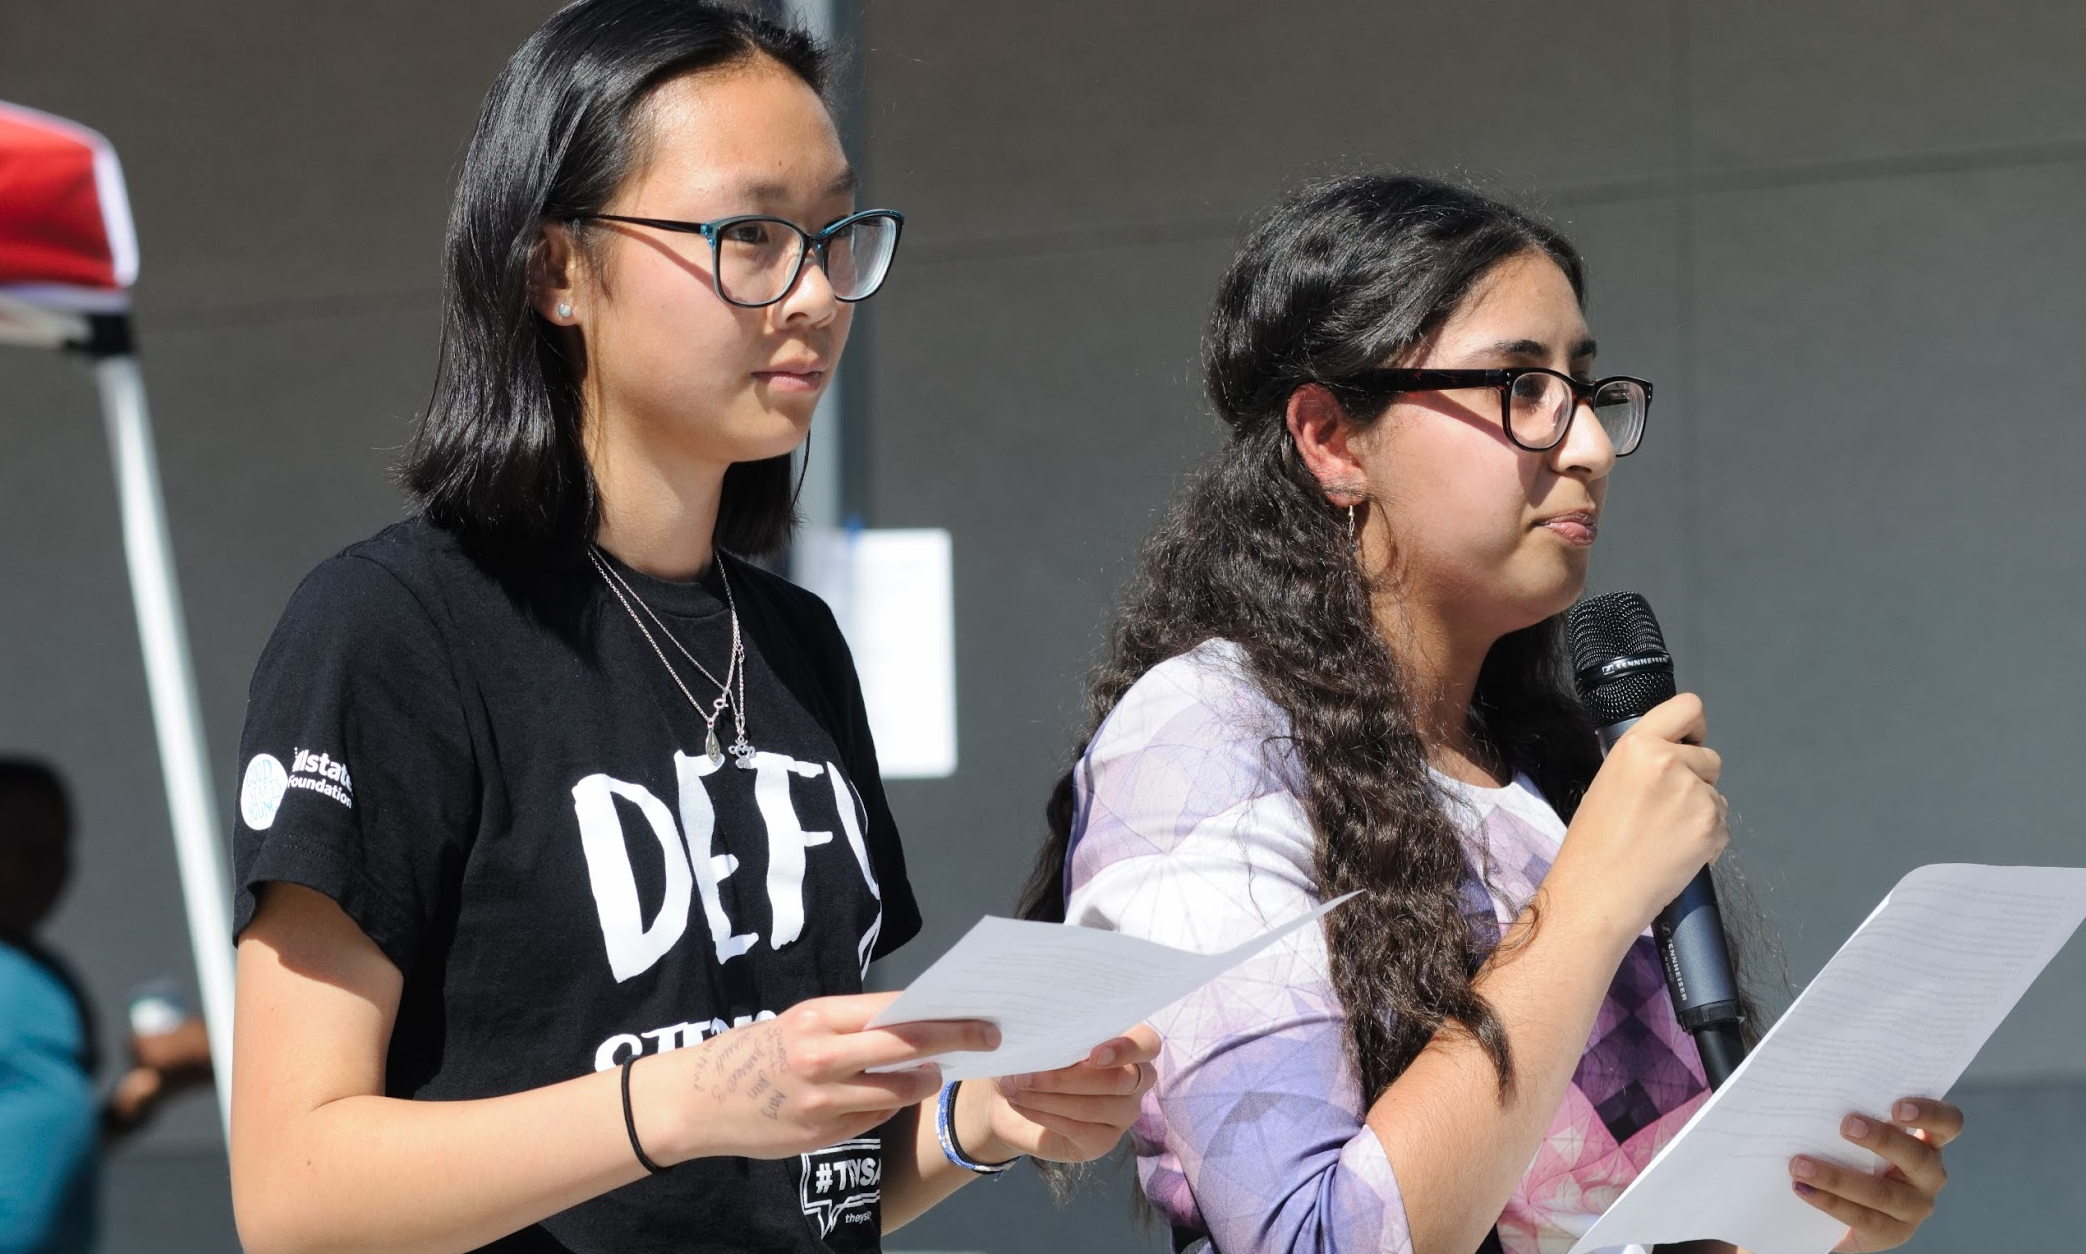 Leaders of WE Club Shealyn Massey ‘19 and Yoanna Soliman ‘19 stand on the stage and ask various questions to students that bring awareness to inequality. Credit: Muriel Rowley / The Foothill Dragon Press